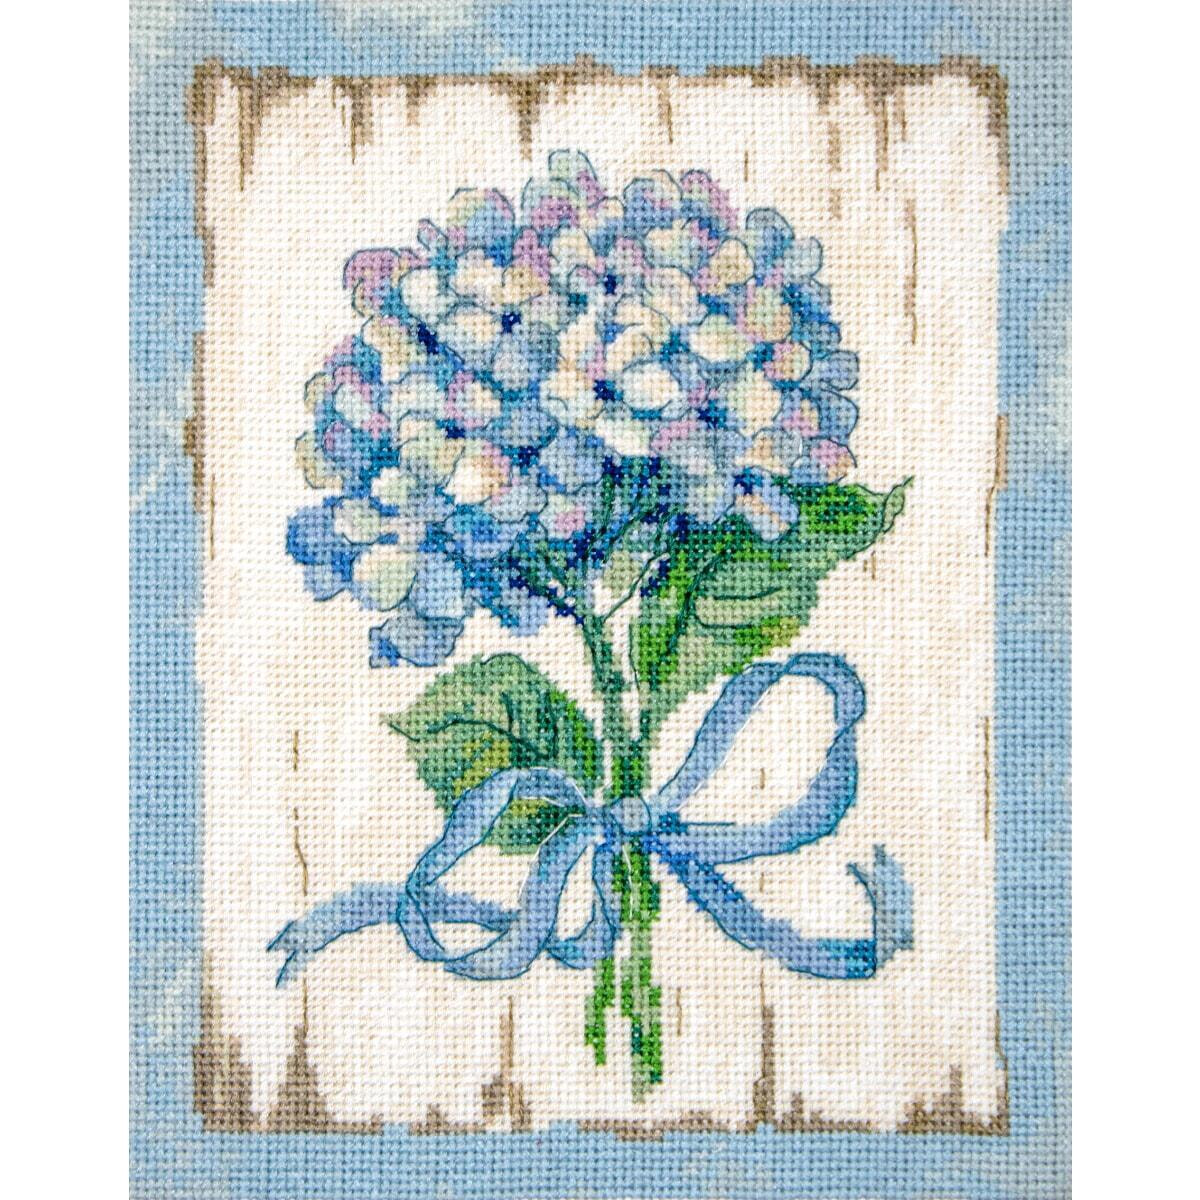 Letistitch counted cross stitch kit "BLUE II",...